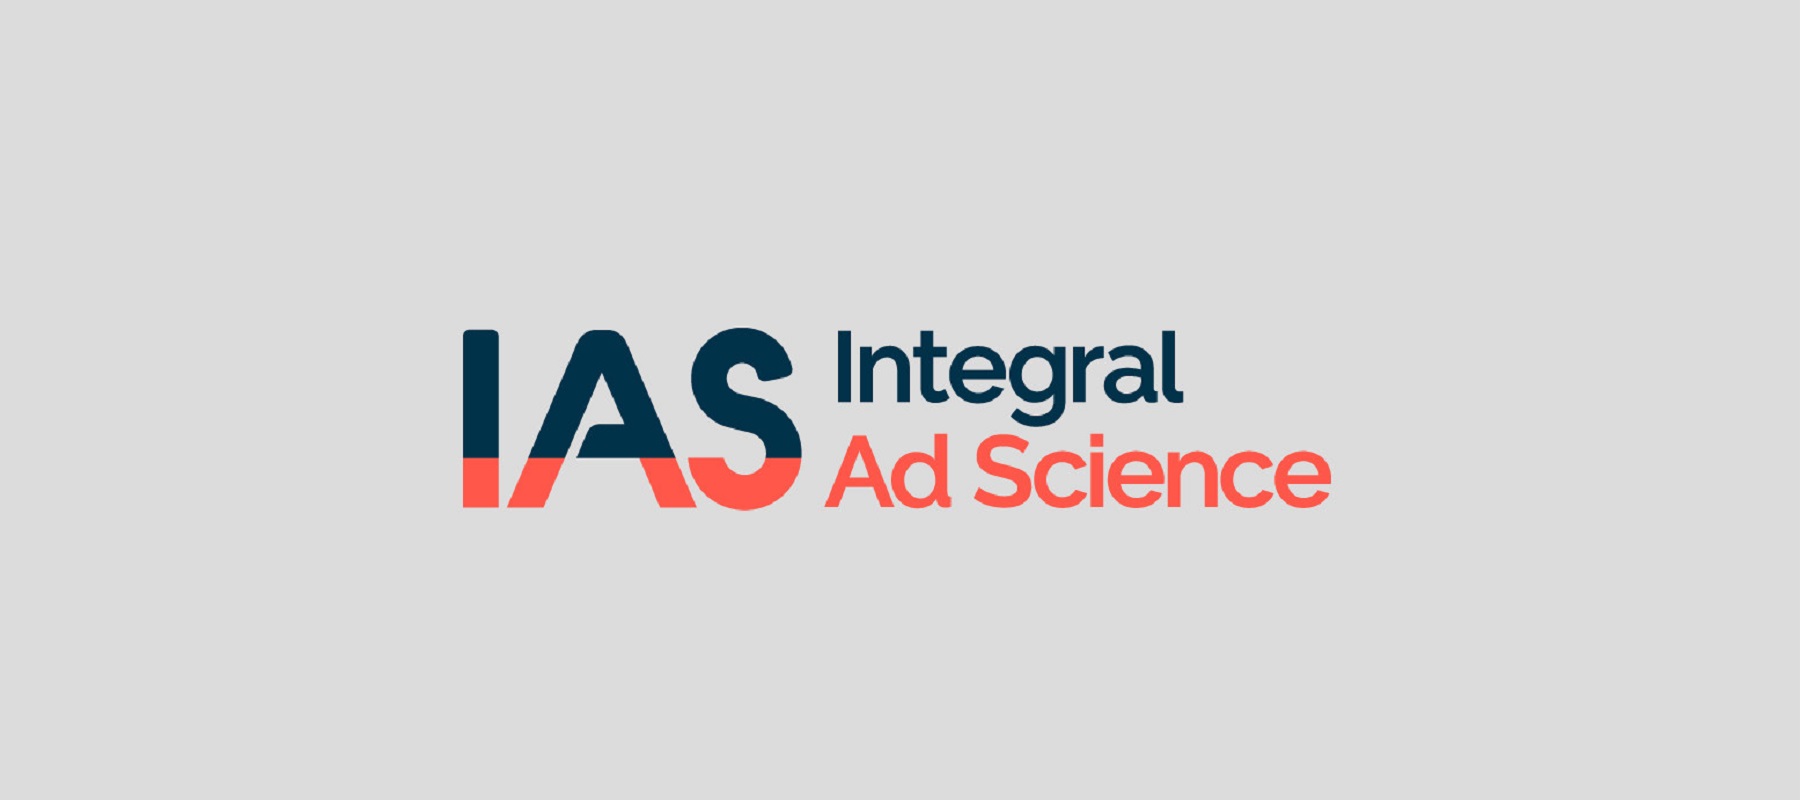 Integral Ad Science partners with Instacart to launch transparency in Instacart ads